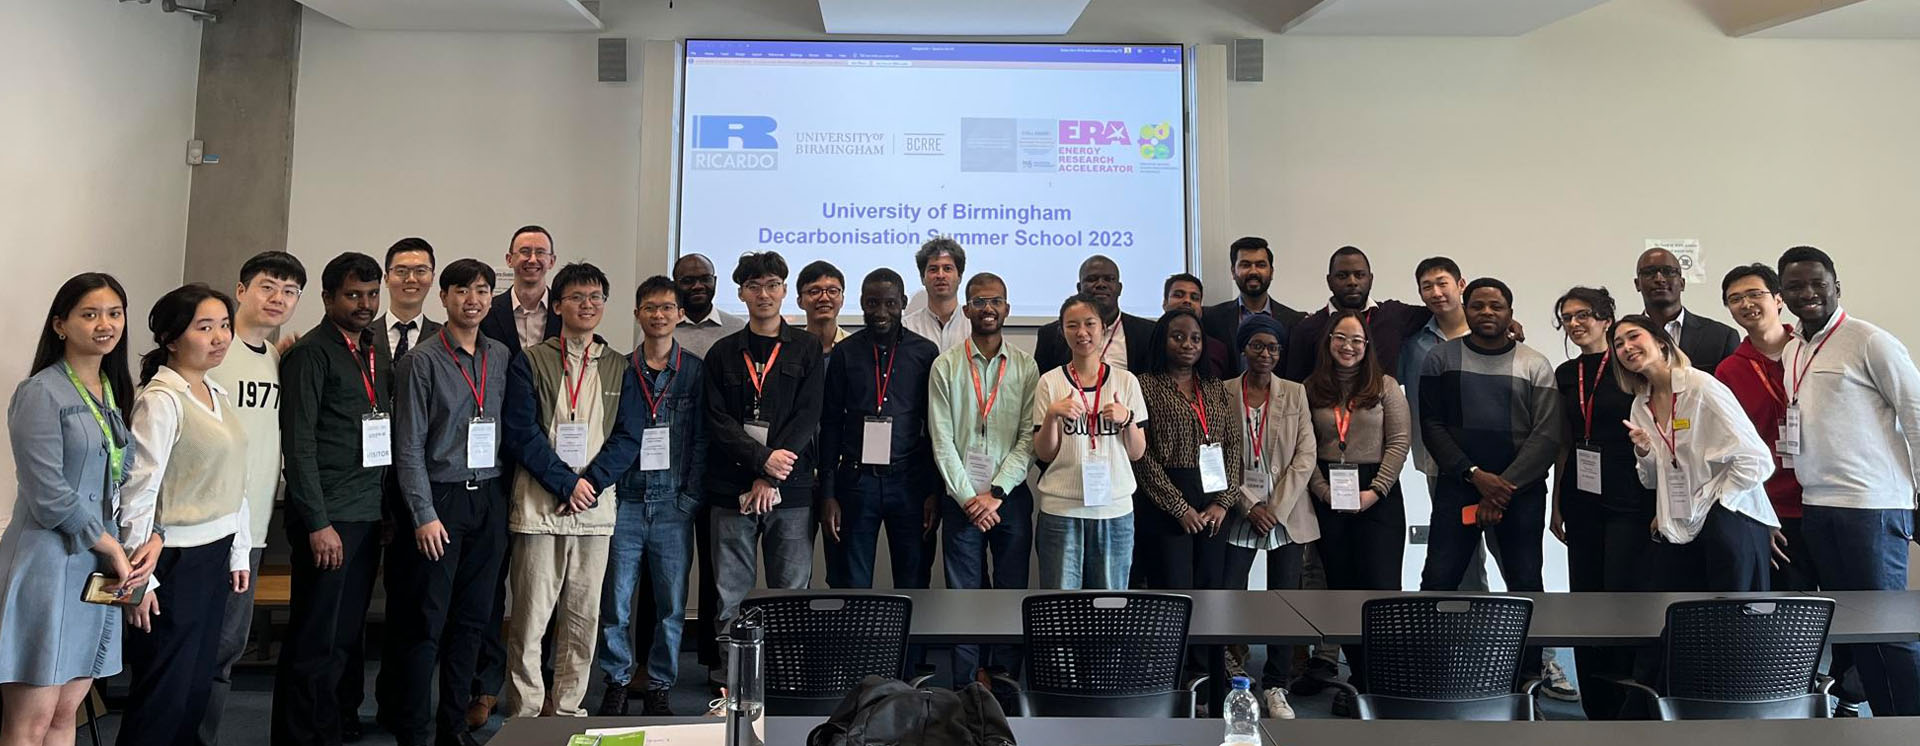 A group of postgraduate researchers from 11 UK universities standing in front of a presentation screen